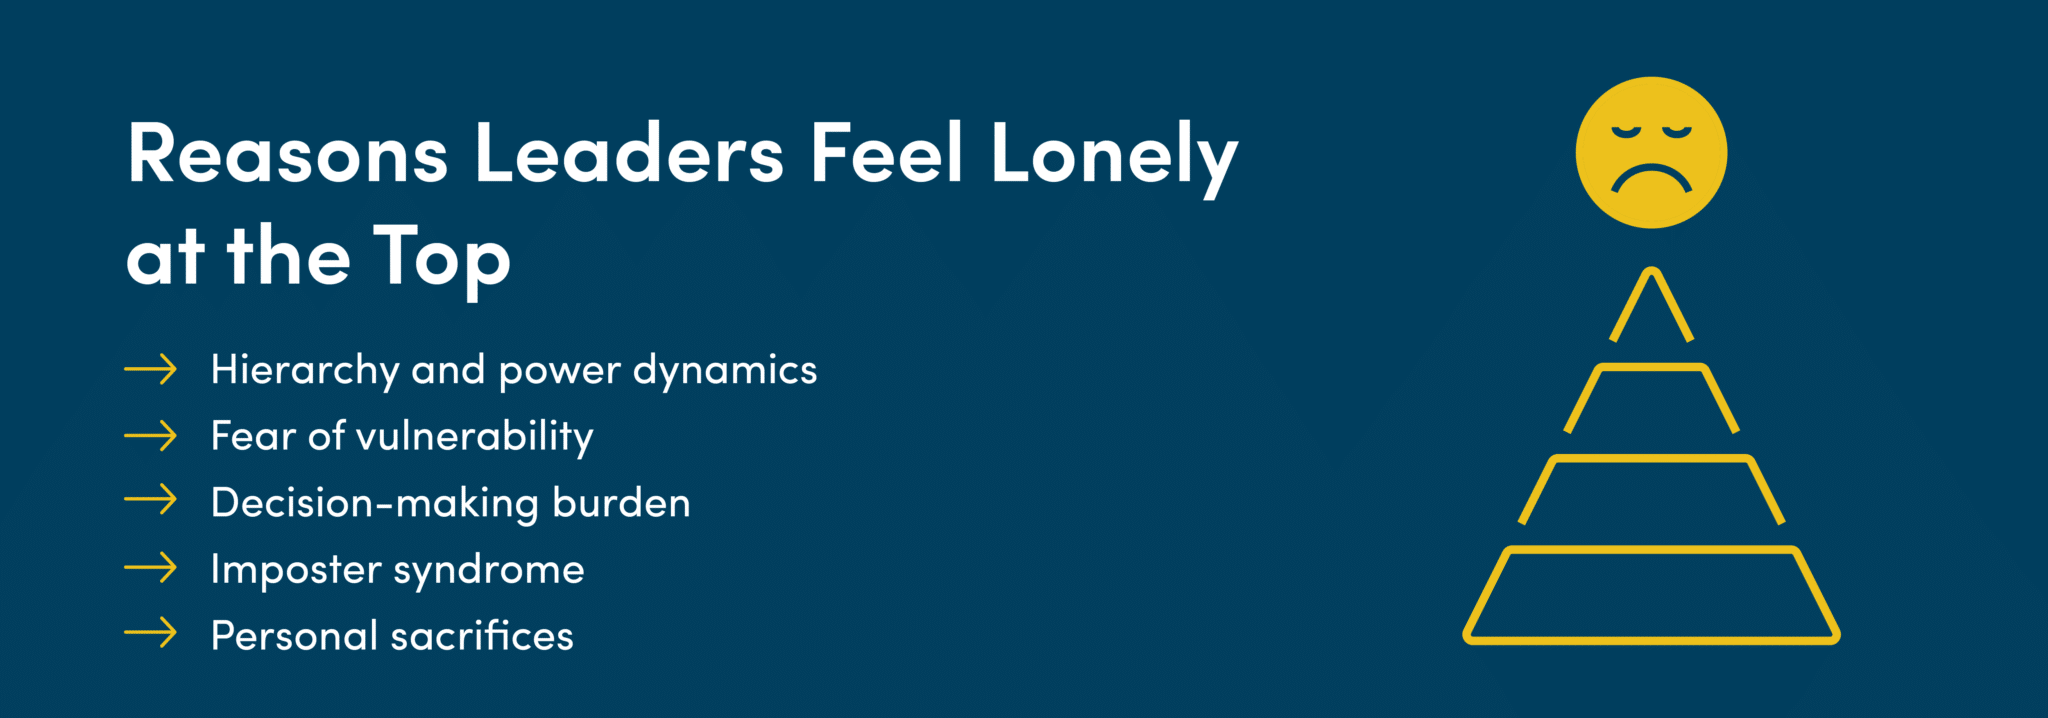 Reasons leaders feel lonely at the top